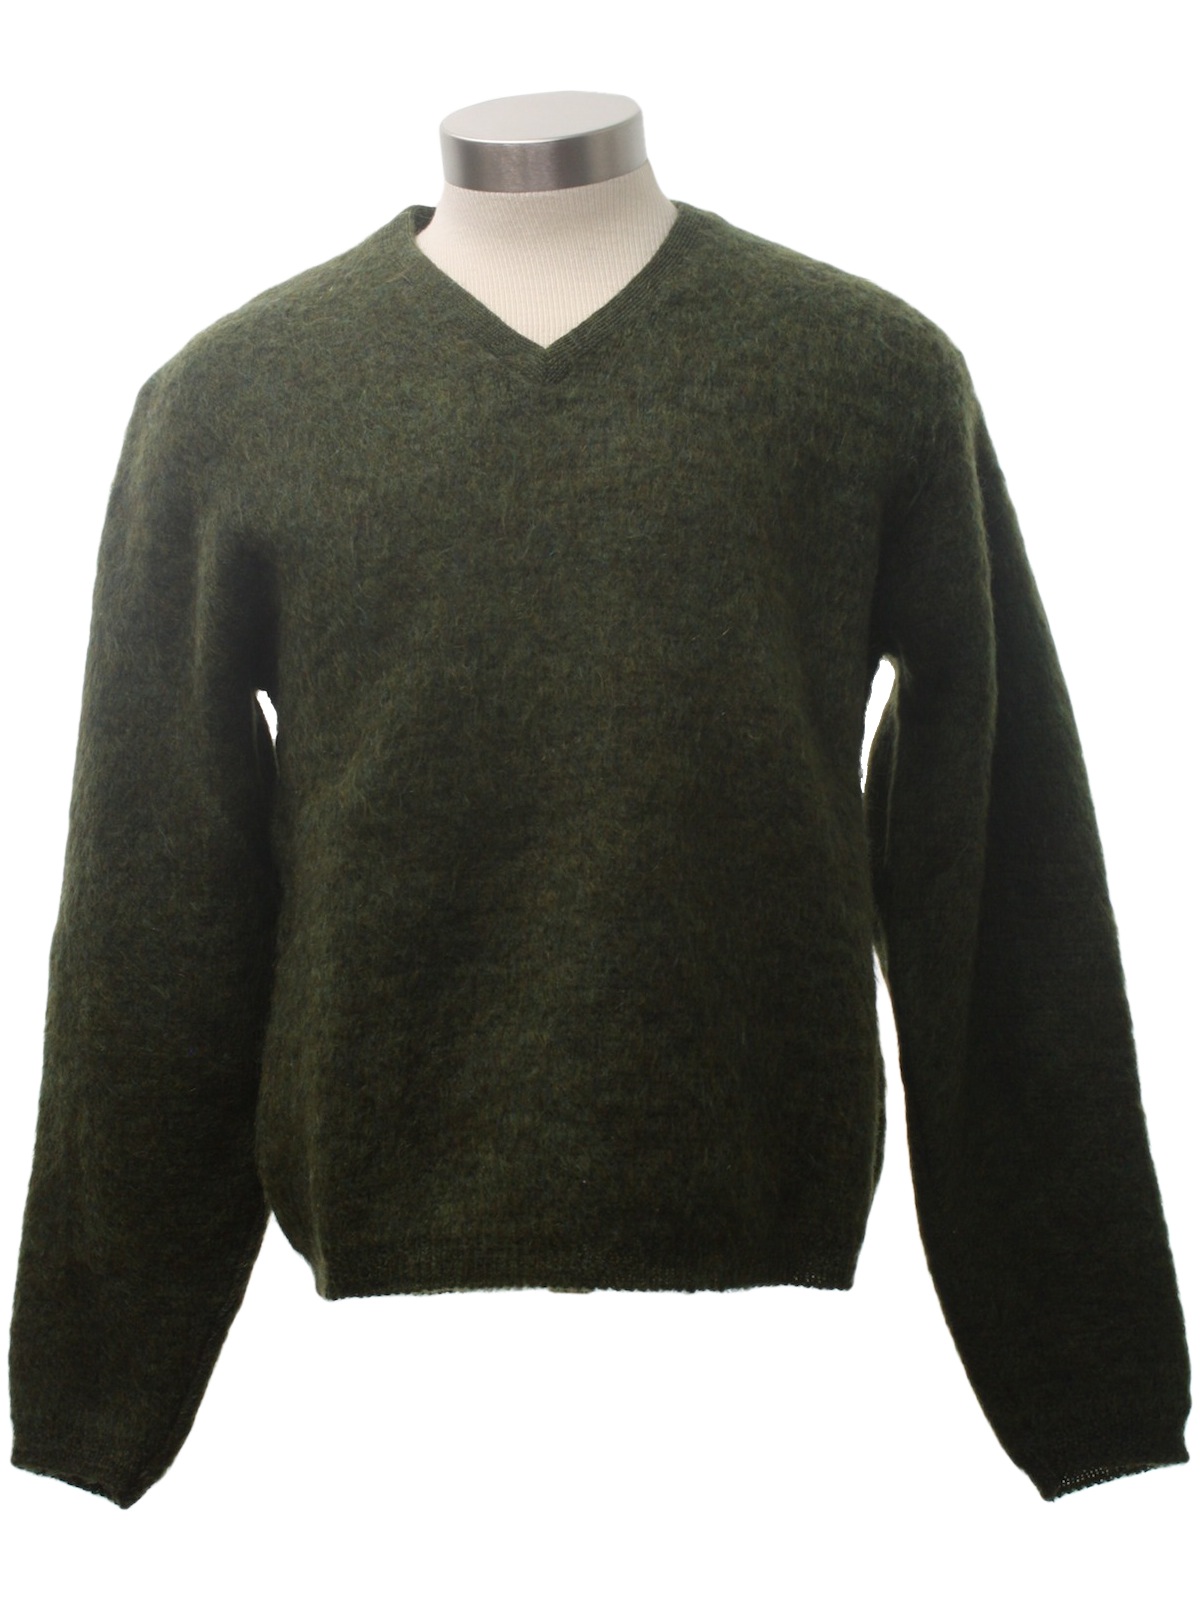 Retro 1950's Sweater (Towncraft) : 50s -Towncraft- Mens or boys ...